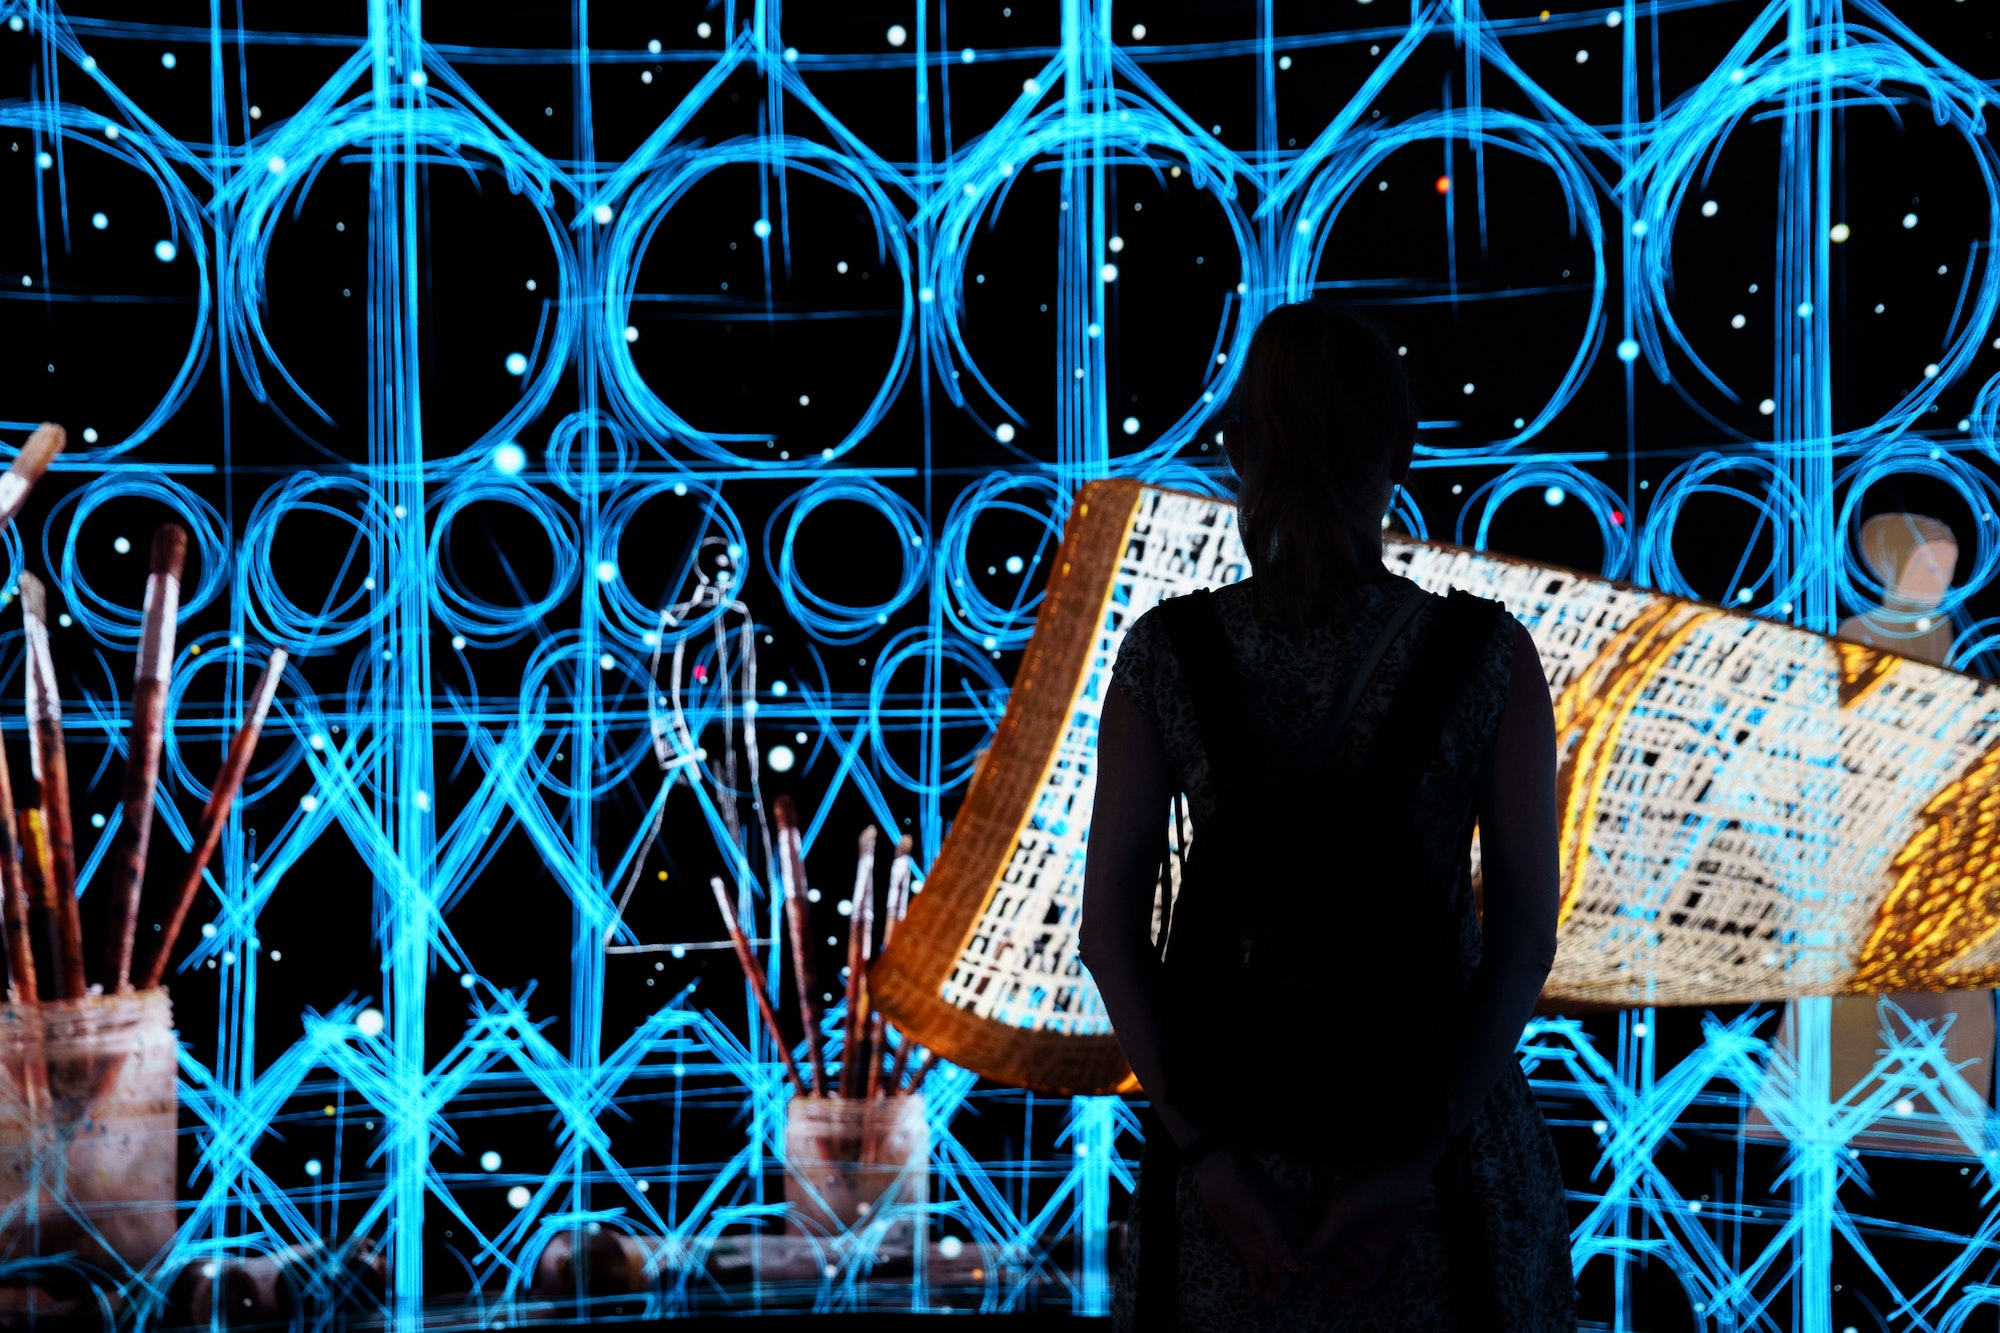 Woman silhouette in front of Digital art panel in one of the Expo in Dubai